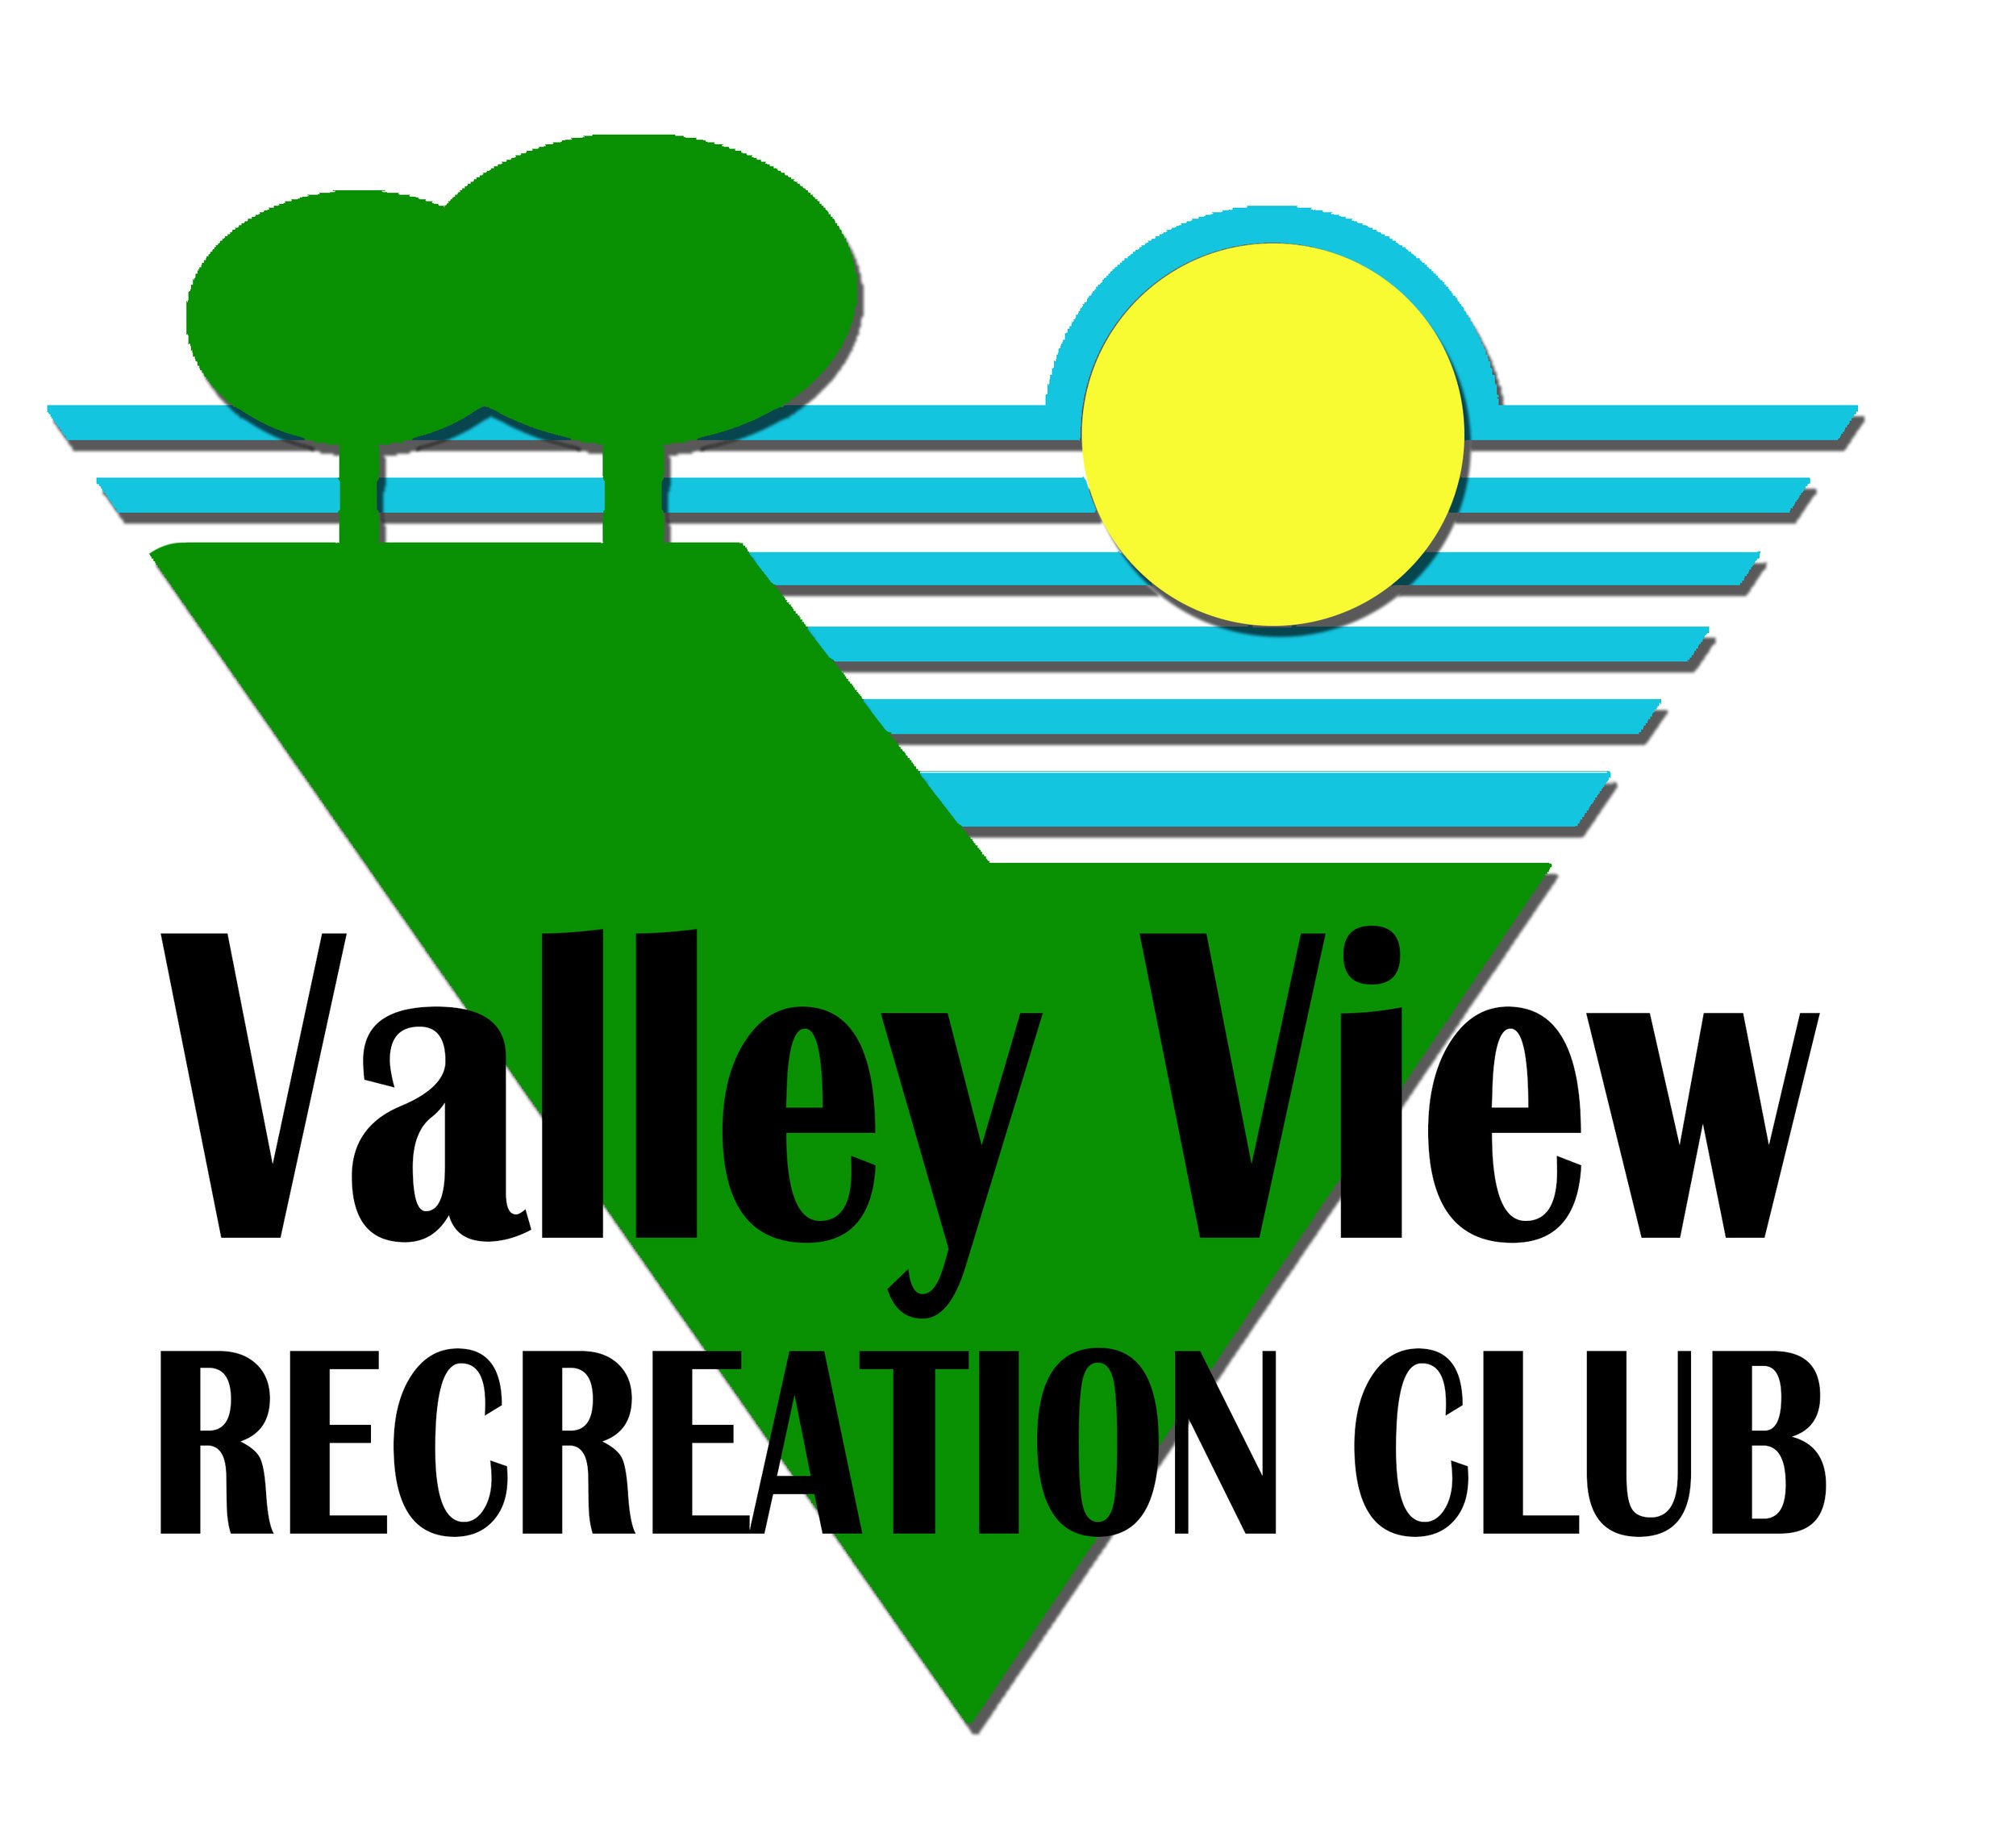 Valley View Recreation Club pic pic